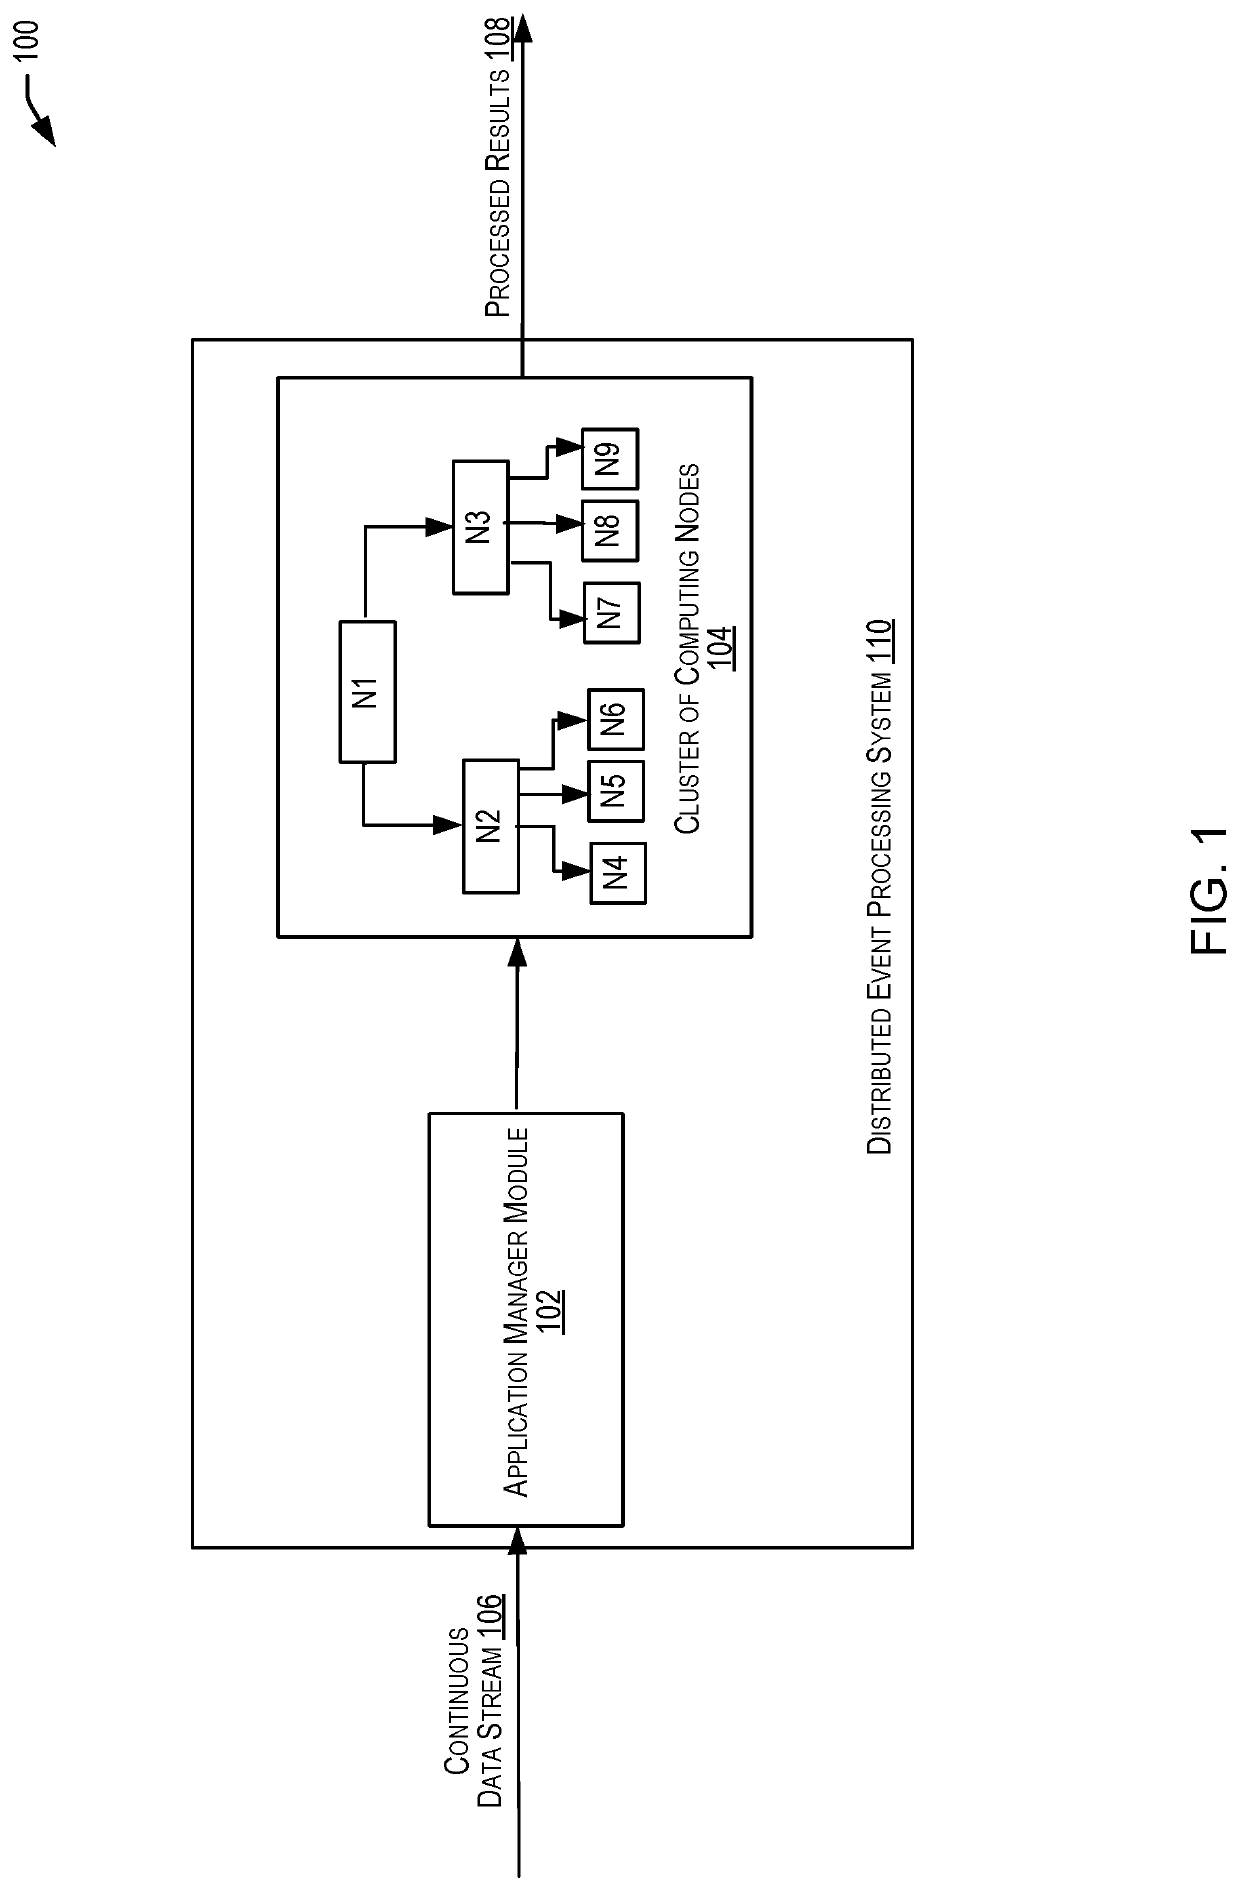 Integrating logic in micro batch based event processing systems